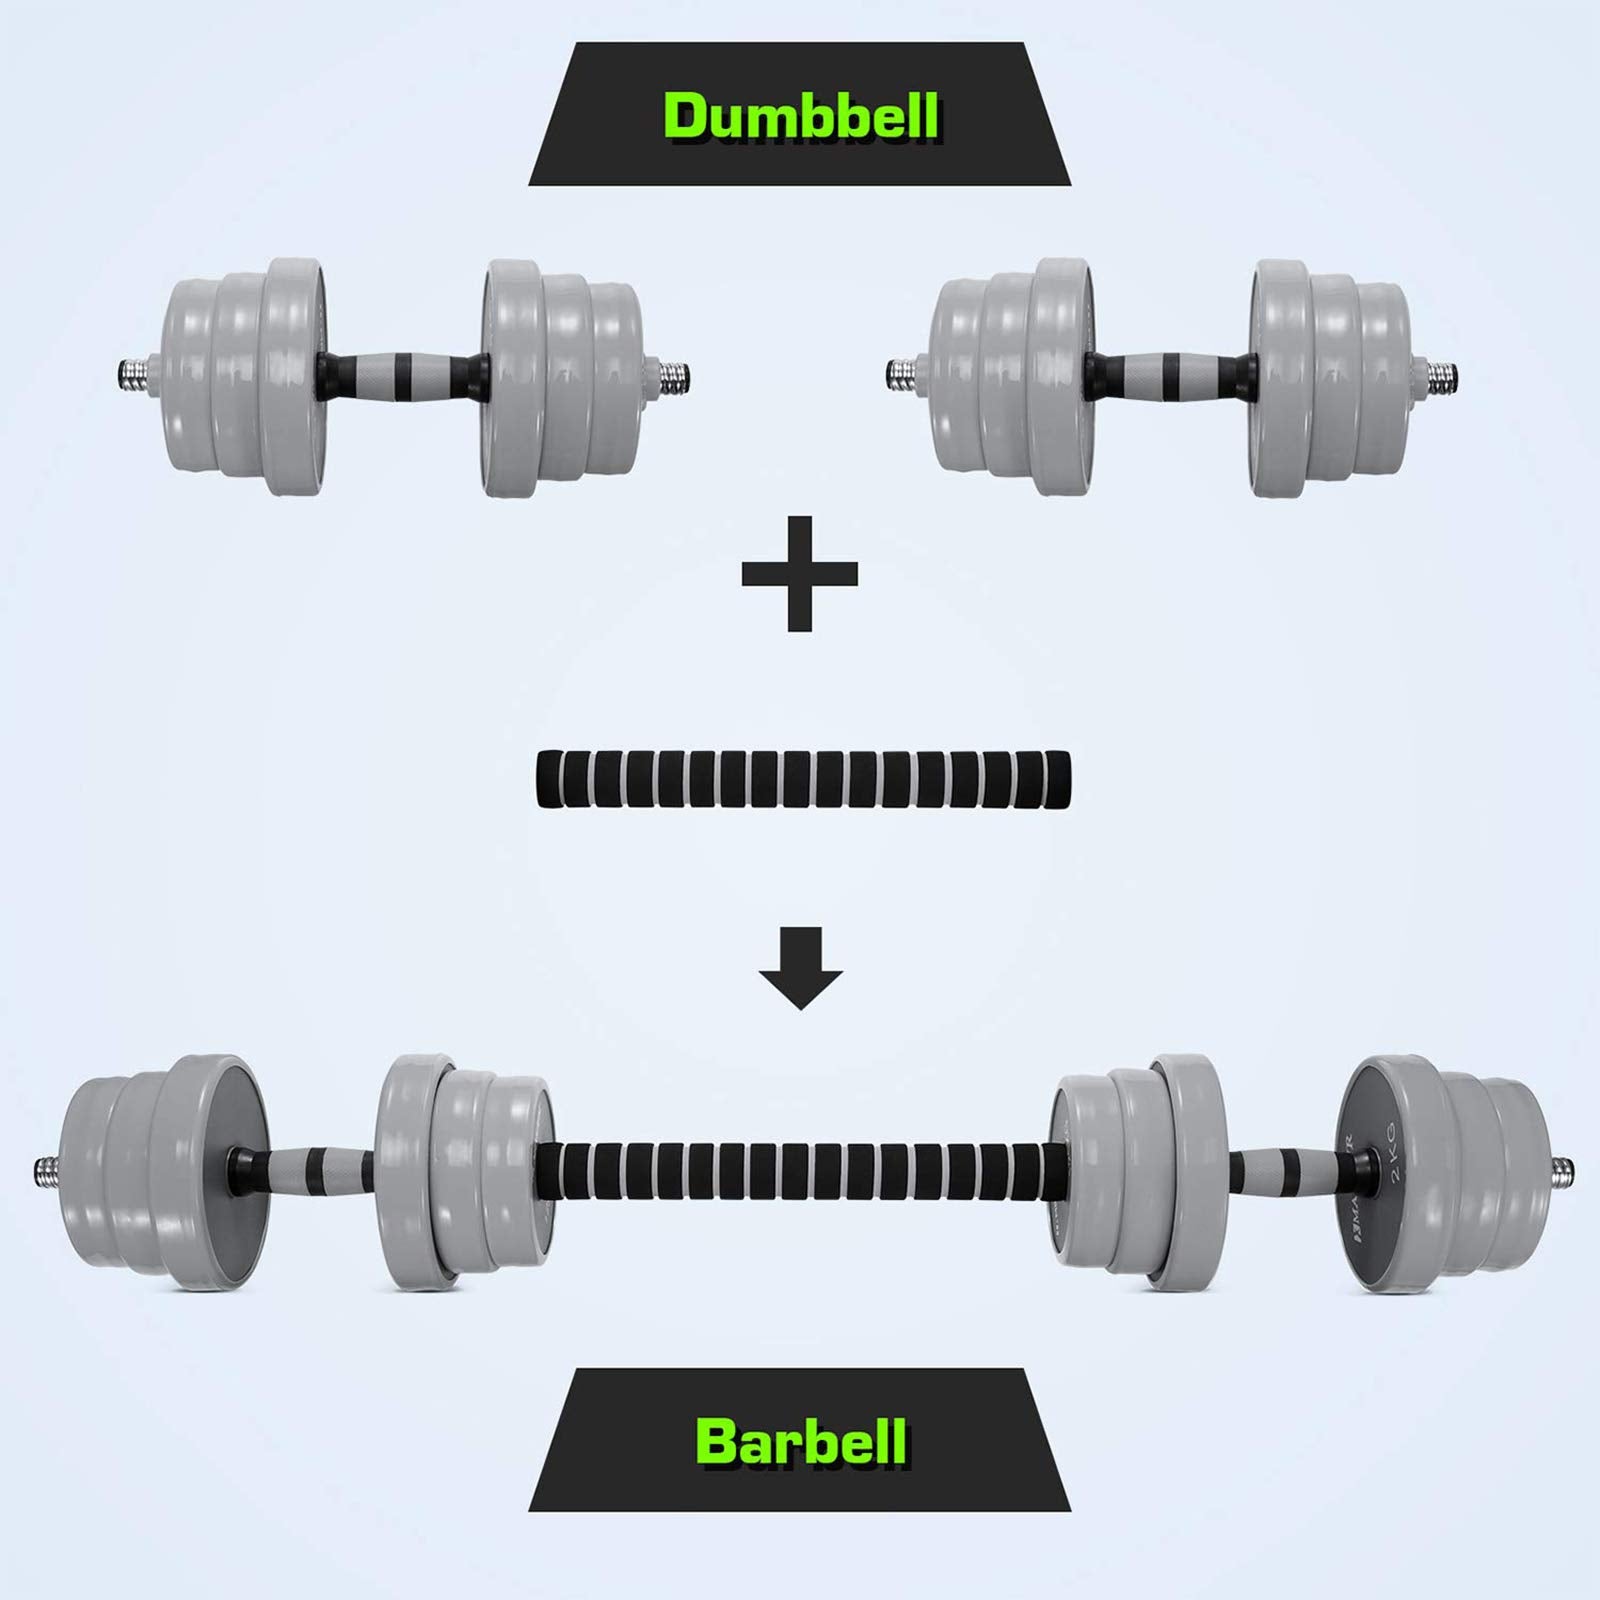 Load image into Gallery viewer, MARNUR Adjustable Dumbbell Barbell Weight Set, 44 LB Dumbbell Barbell Set with Connecting Rod Used as Barbell Weight Set for Exercises Fitness, Home Gym Weights for Men and Women
